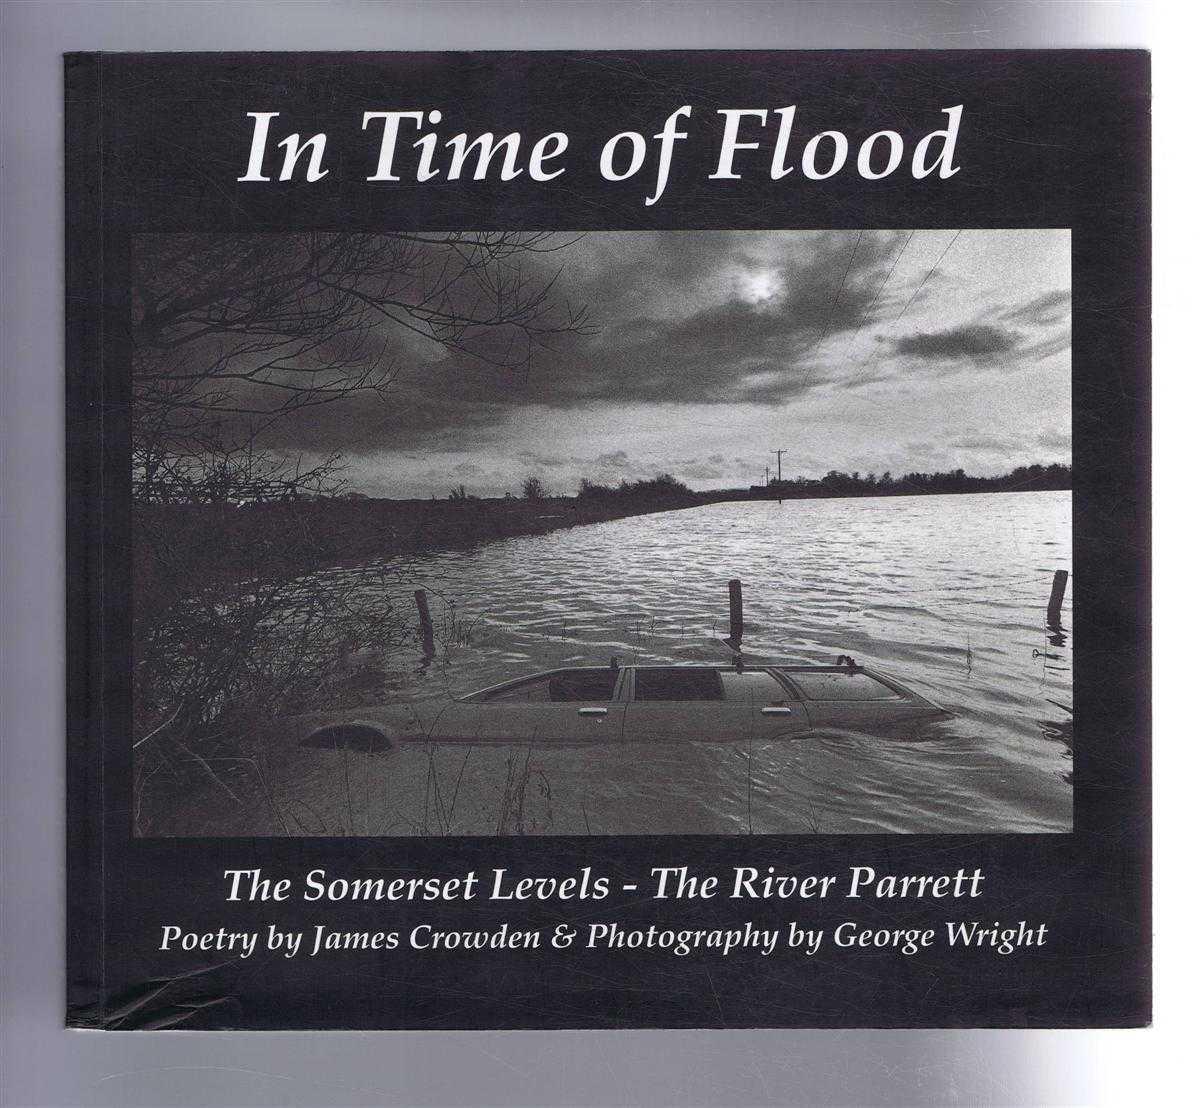 Crowden, James - In Time of Flood: The Somerset Levels - The River Parrett